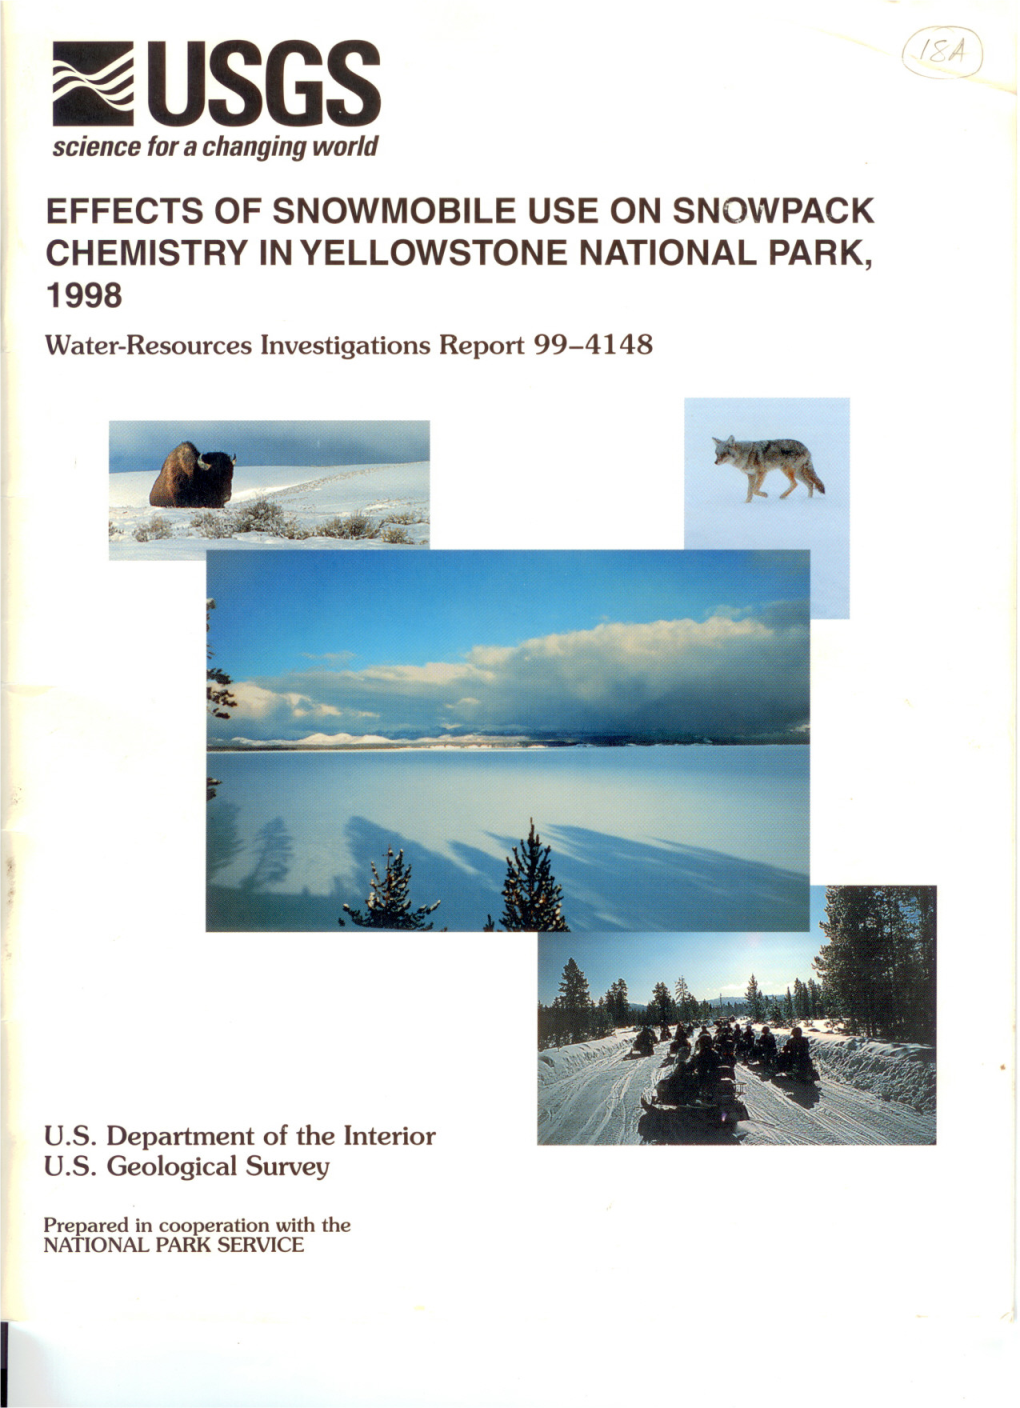 Effects of Snowmobile Use on Snowpack Chemistry in Yellowstone National Park, 1998